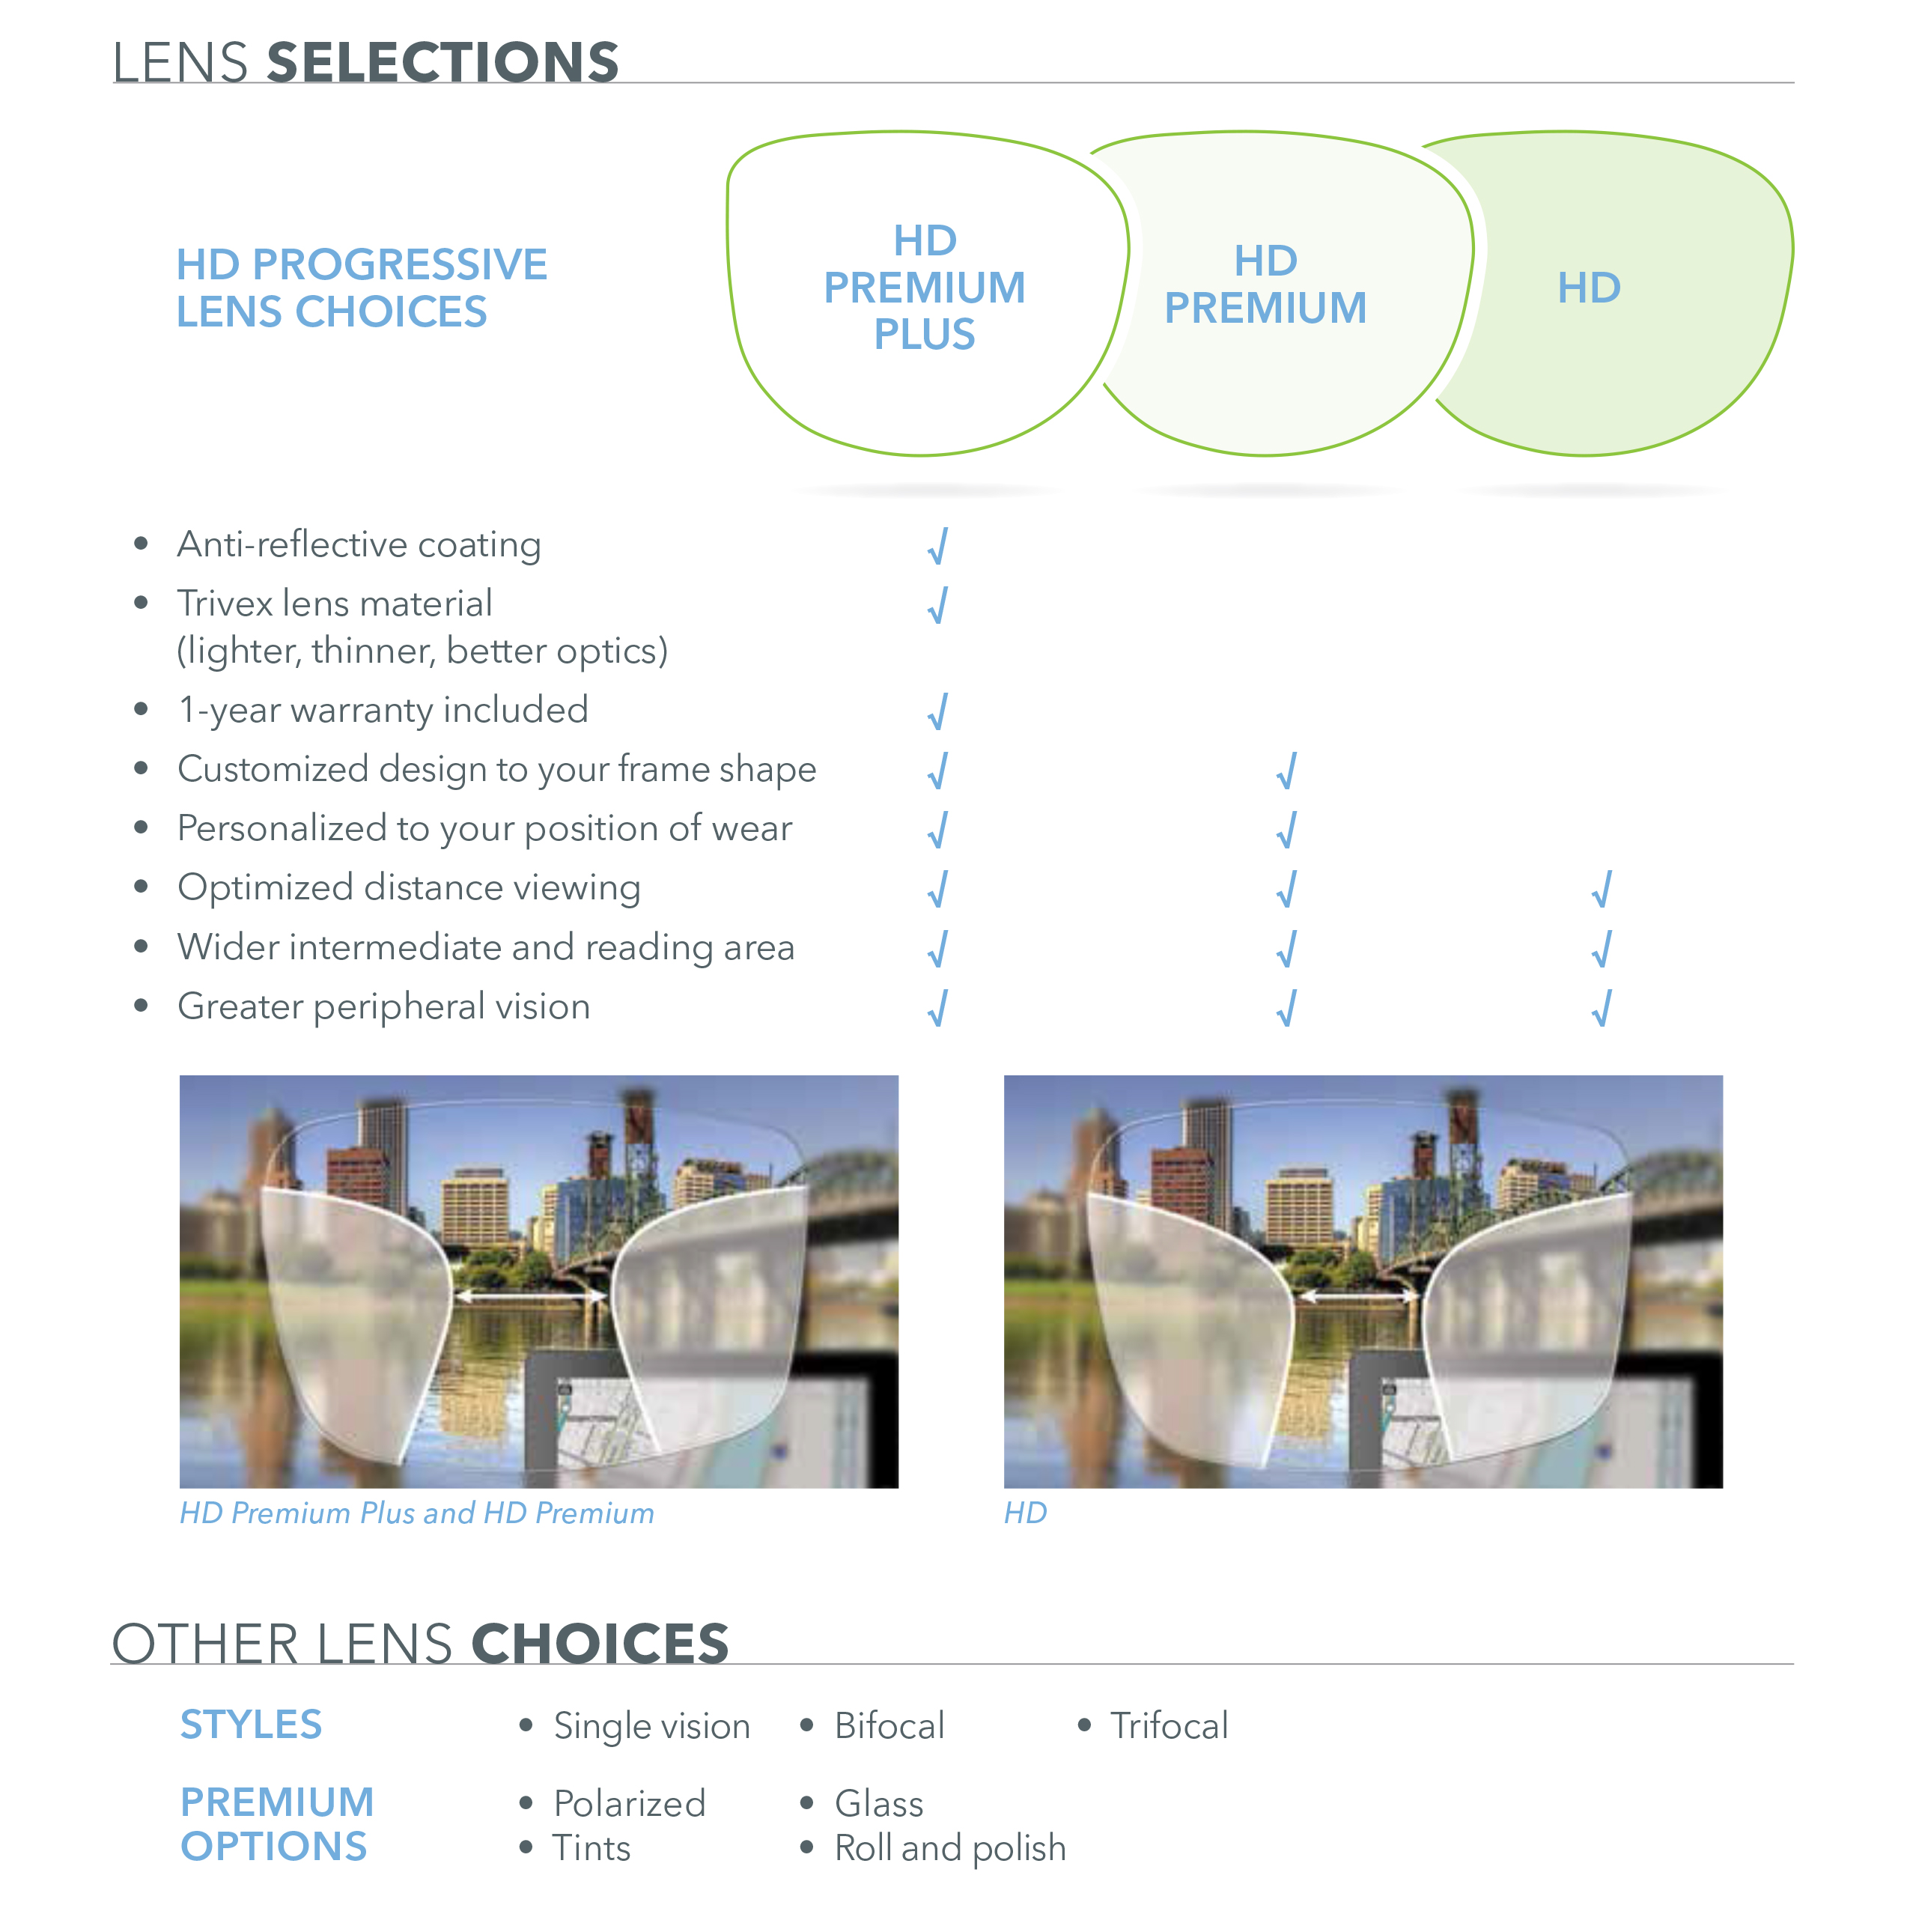 lens selection image